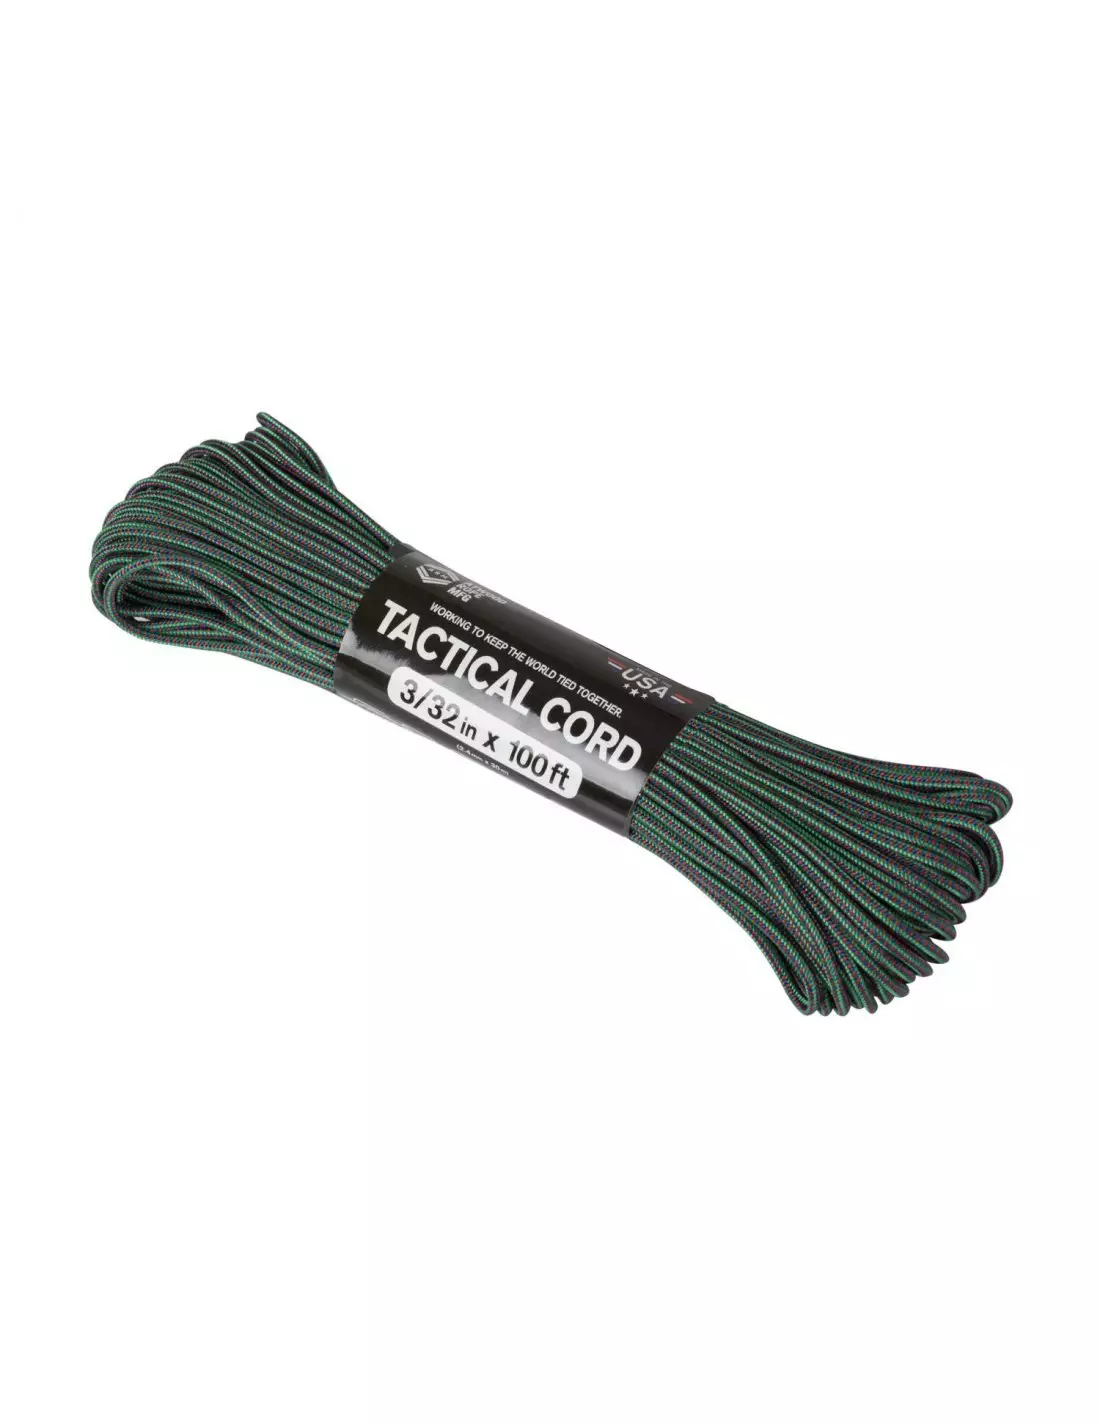 Atwood® Tactical 275 Cord (100FT) - Watermelon